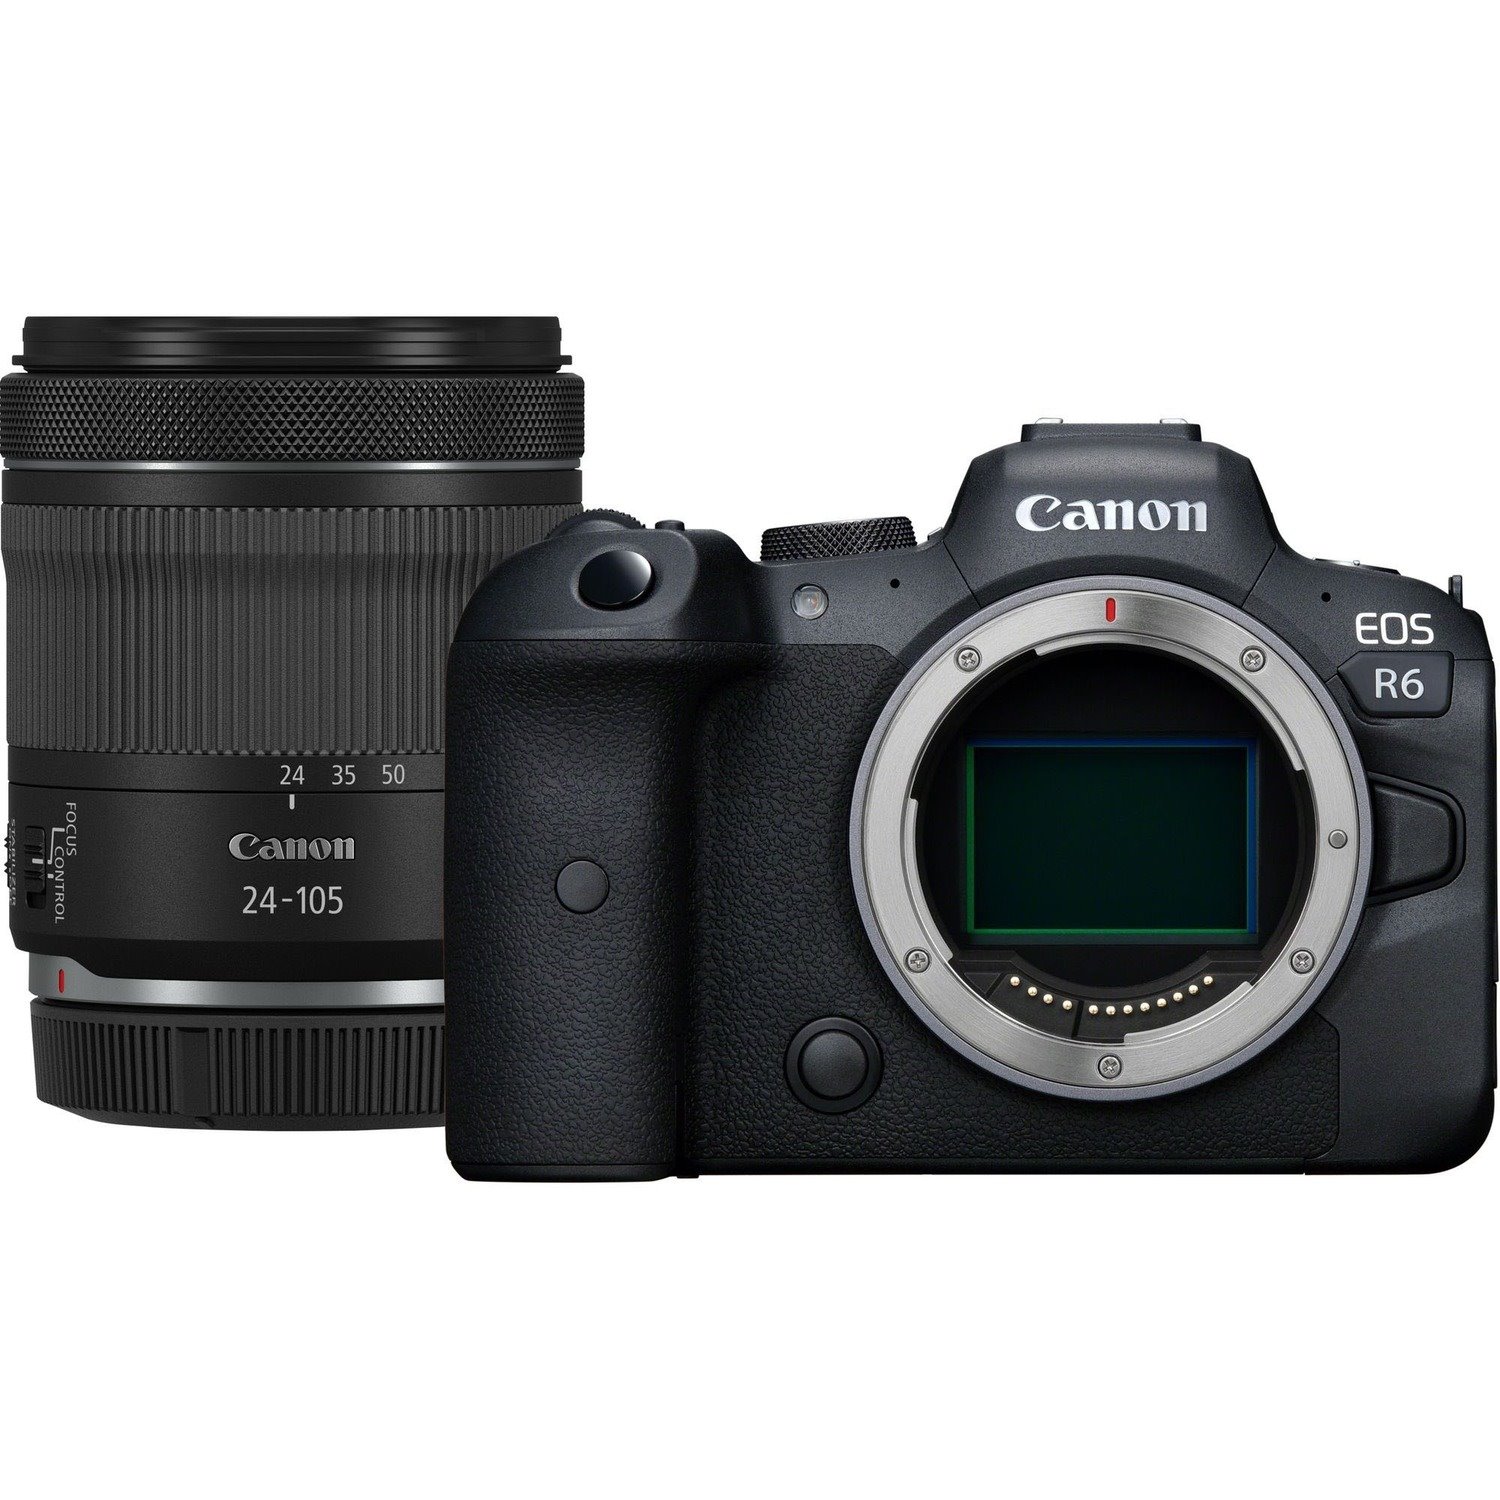 Canon EOS R6 20.1 Megapixel Mirrorless Camera with Lens - 0.94" - 4.13"